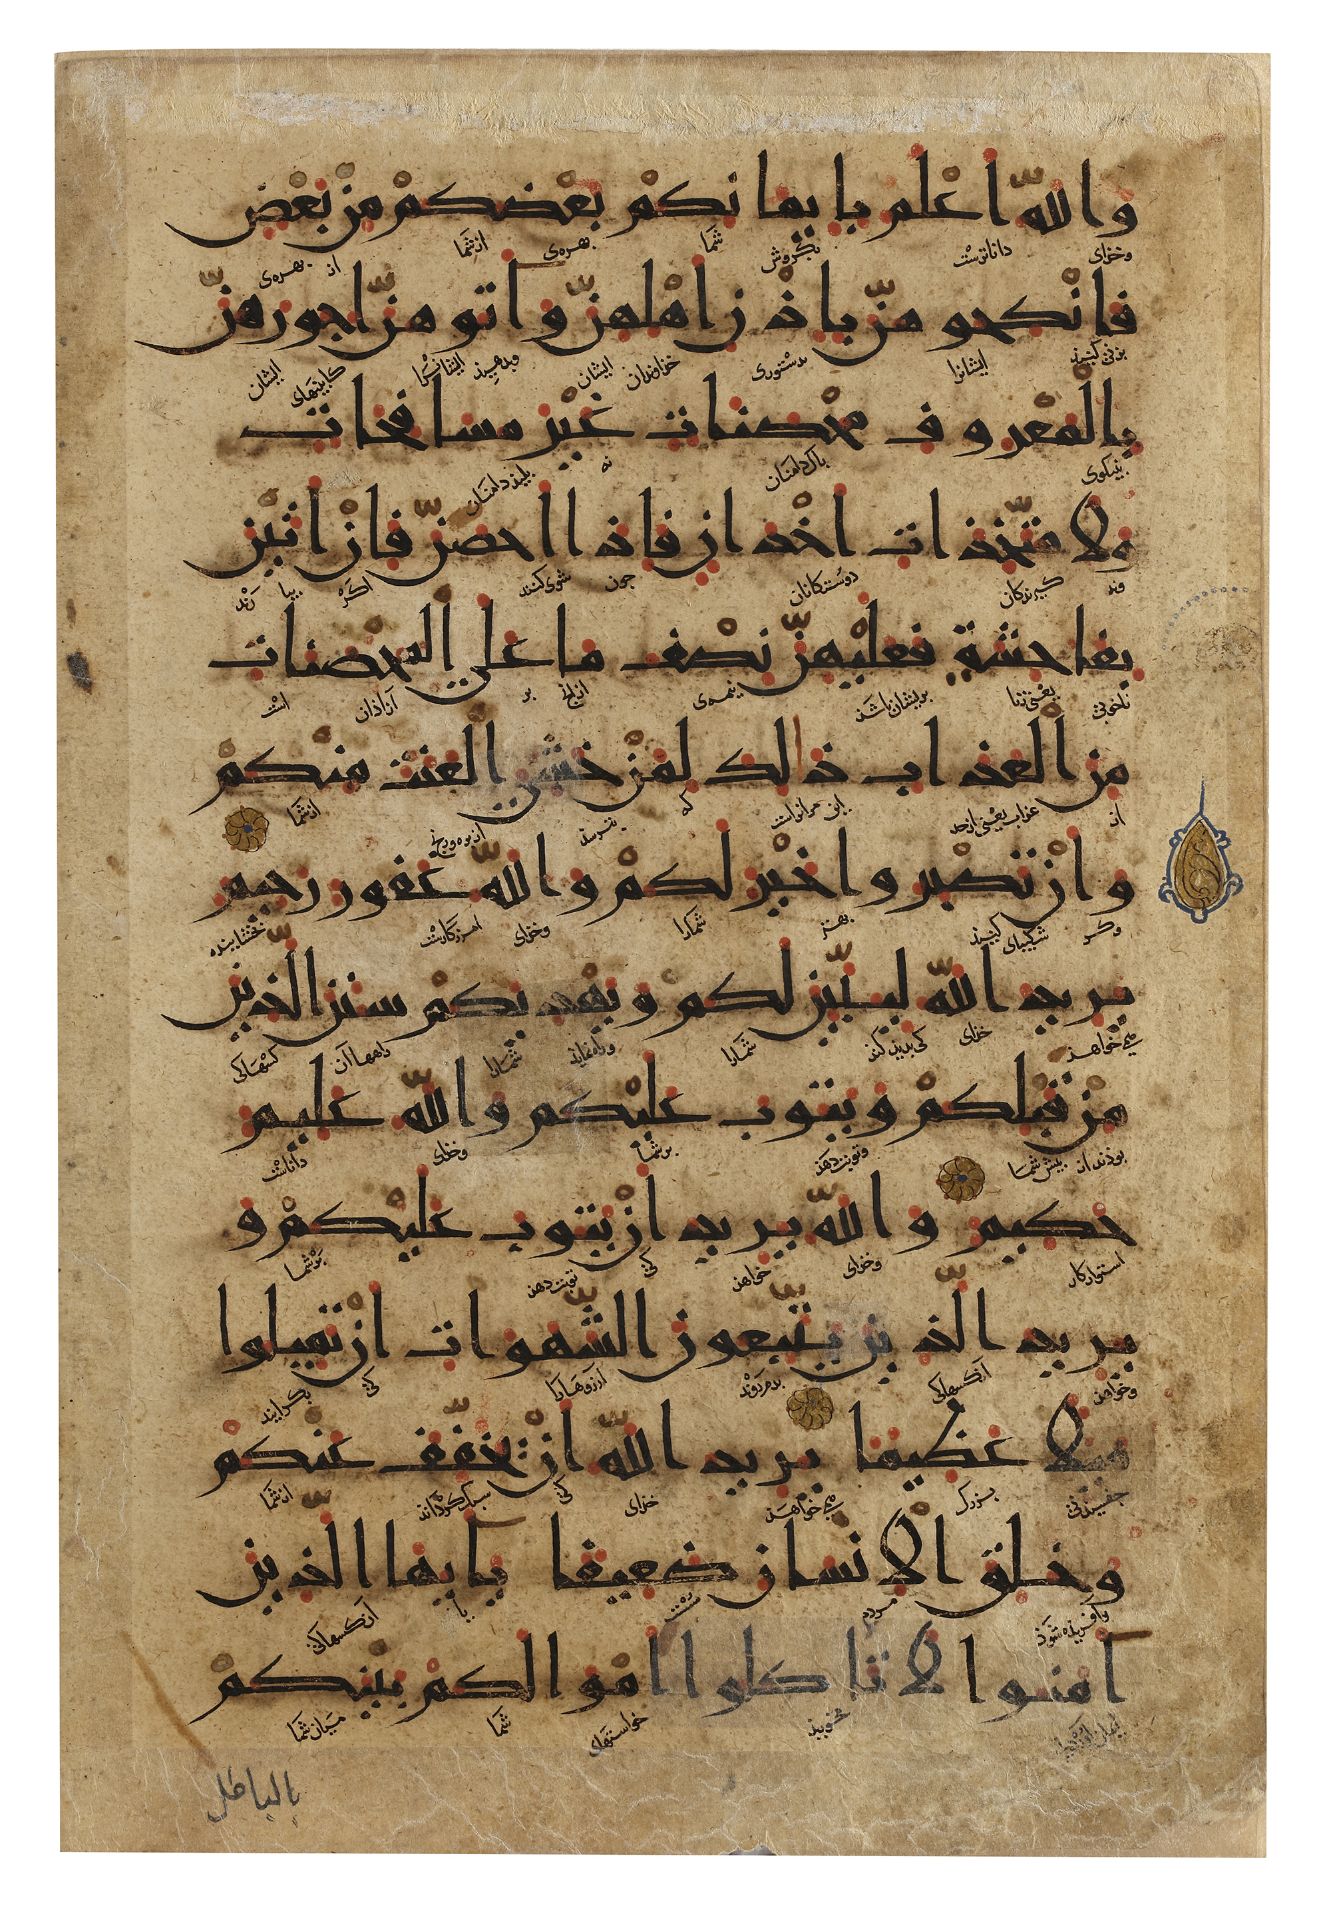 AN EASTERN KUFIC QURAN FOLIO, NEAR EAST, 12TH CENTURY - Image 2 of 4